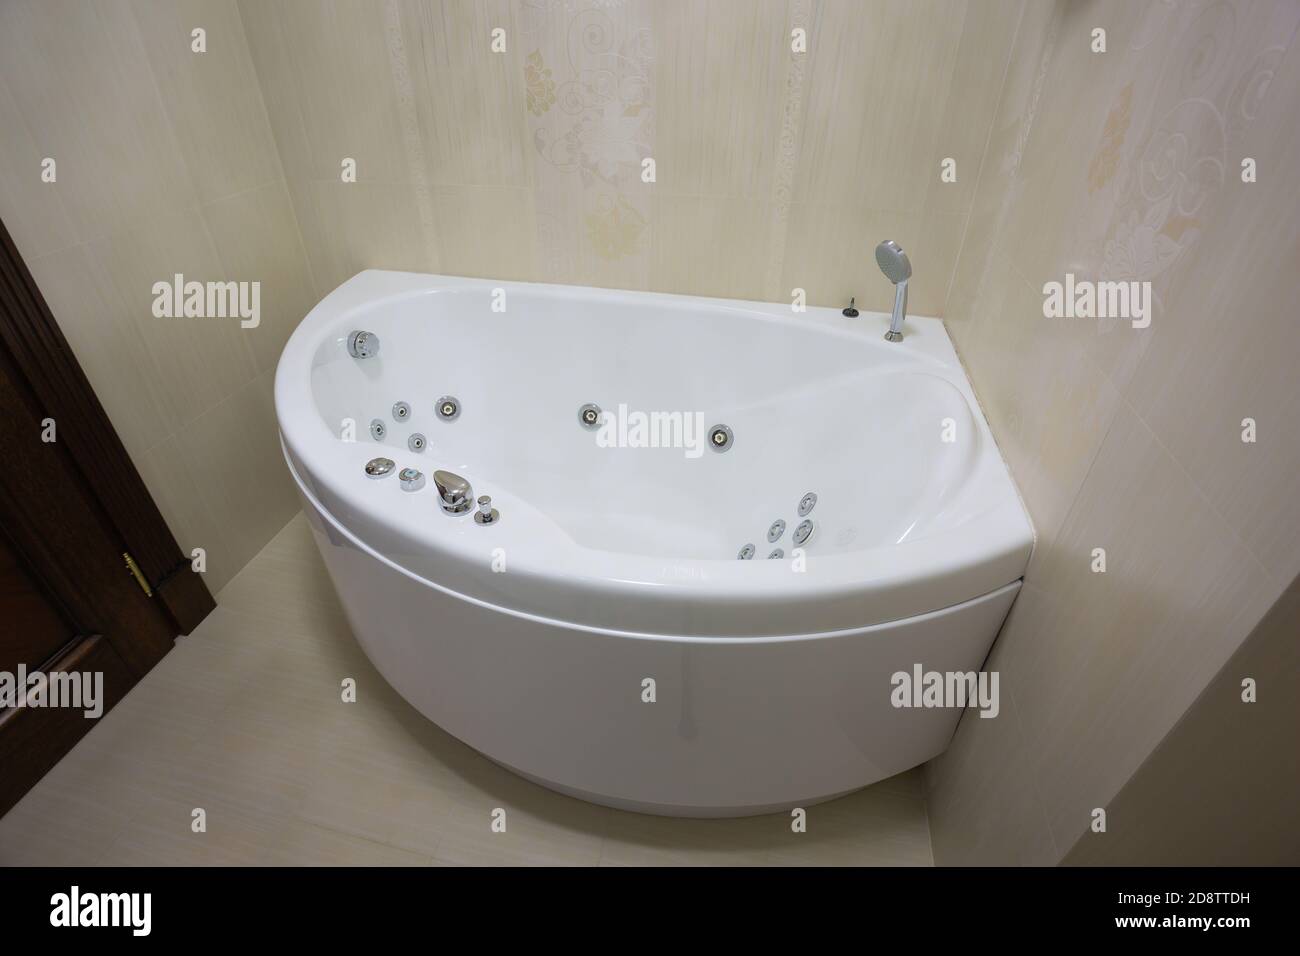 Jacuzzi Bath High Resolution Stock Photography and Images - Alamy